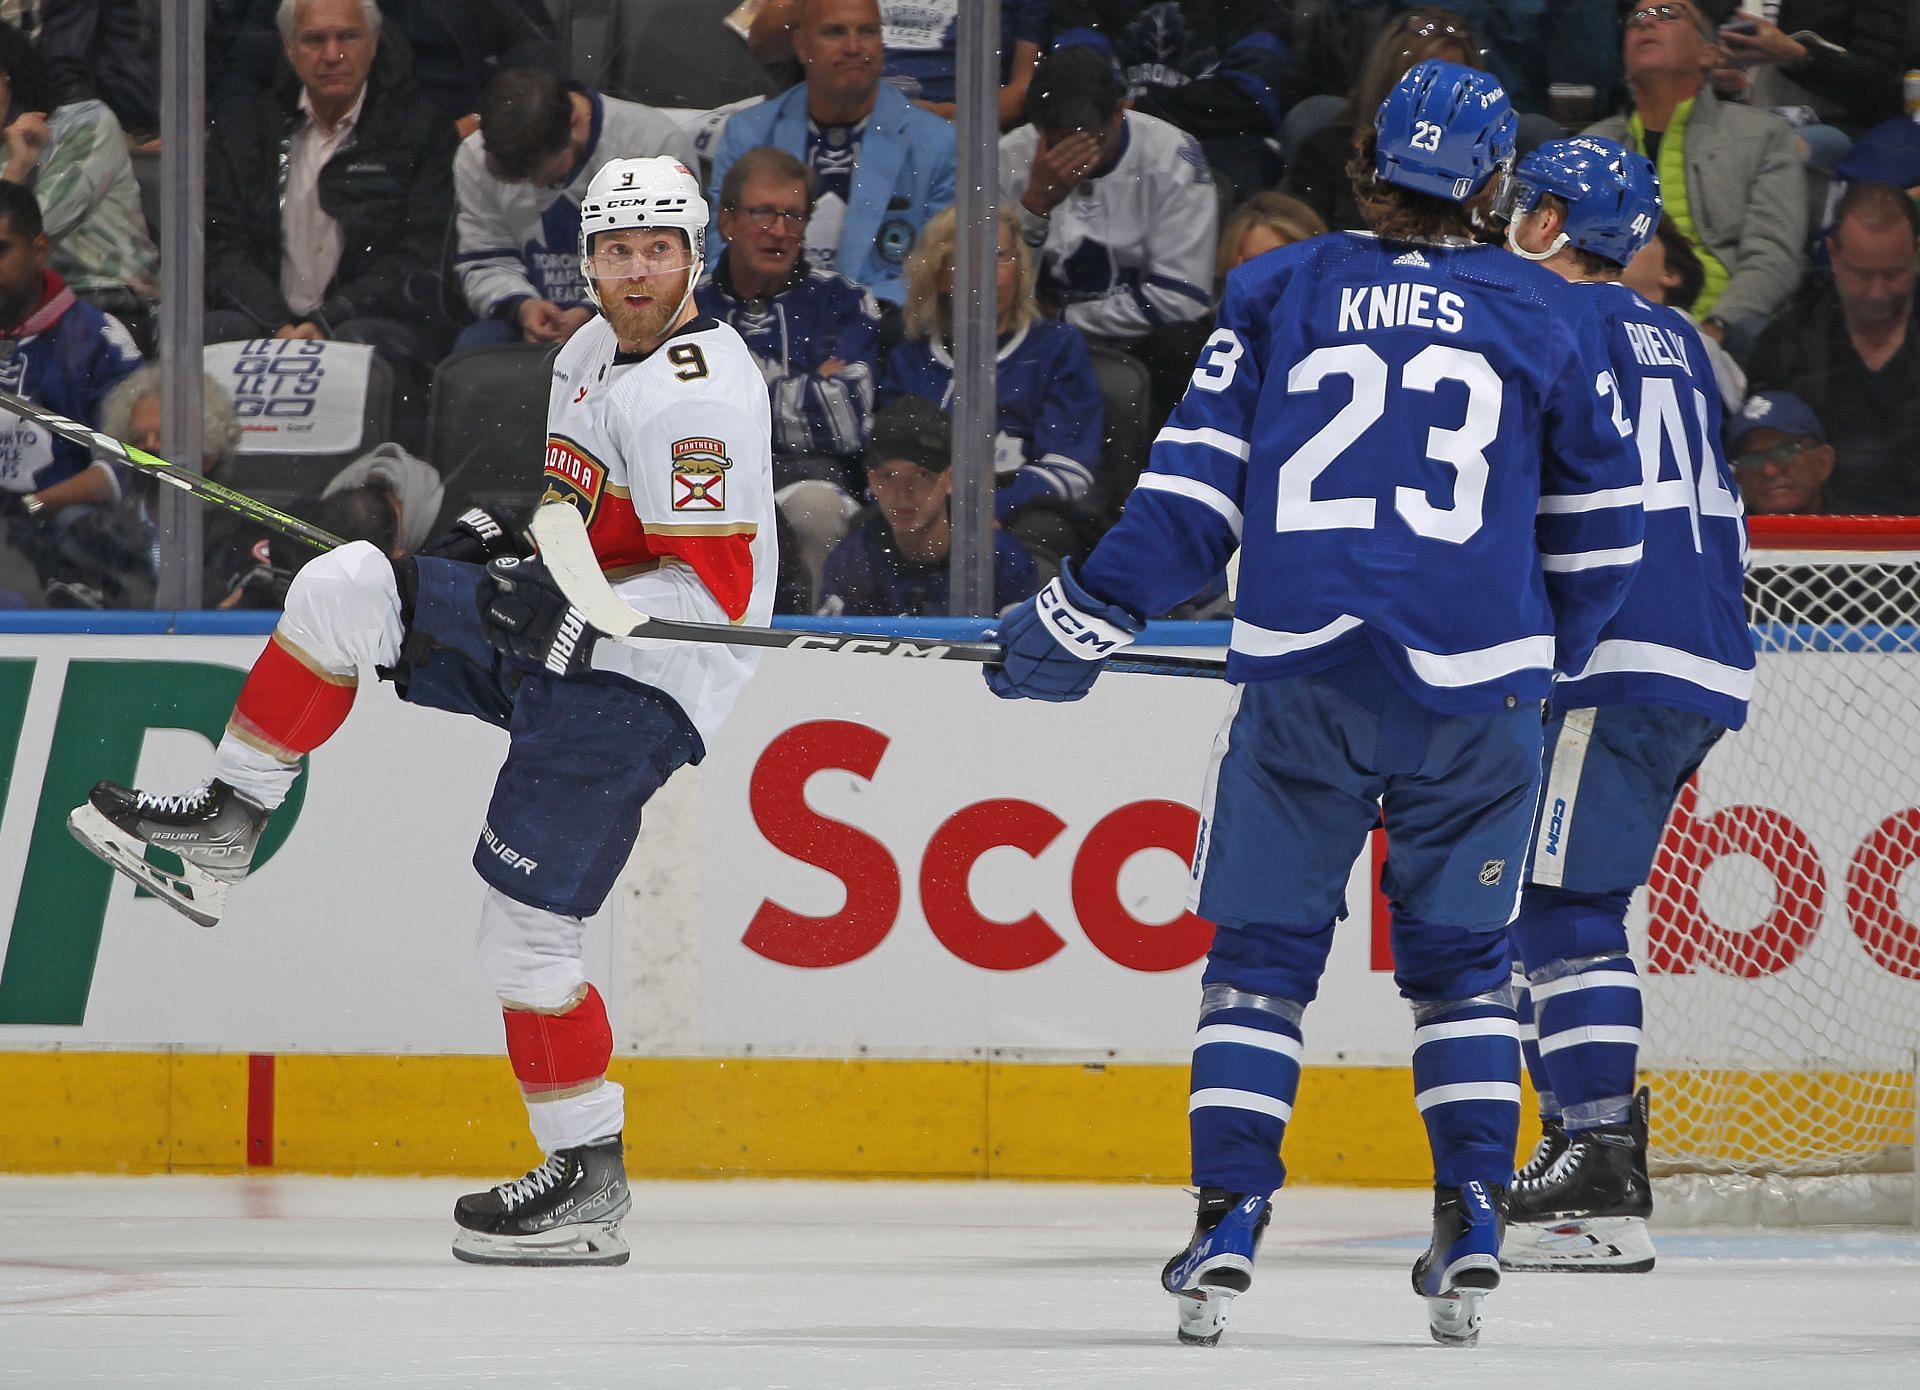 Florida Panthers v Toronto Maple Leafs - Game One